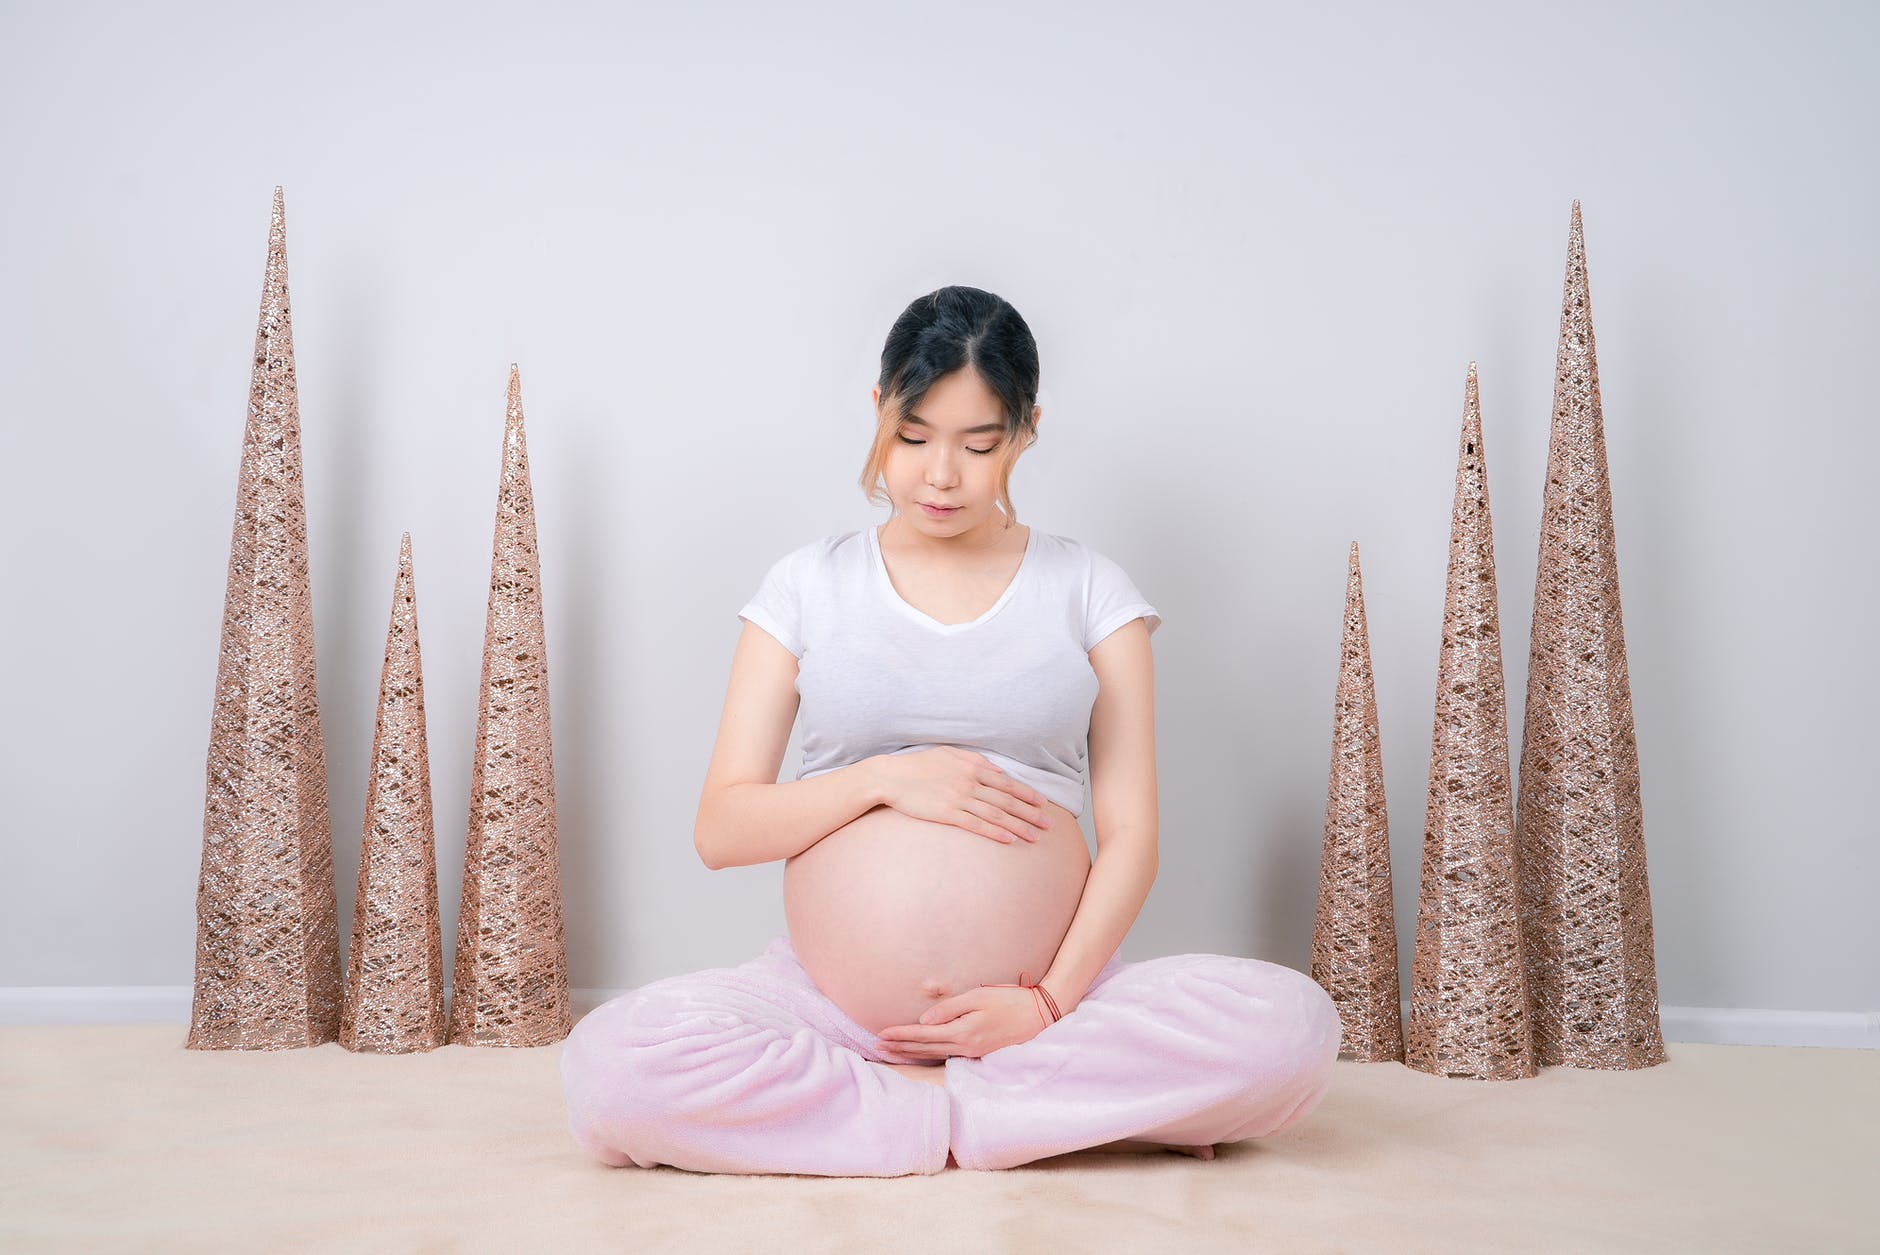 woman showing her baby bump while sitting on floor